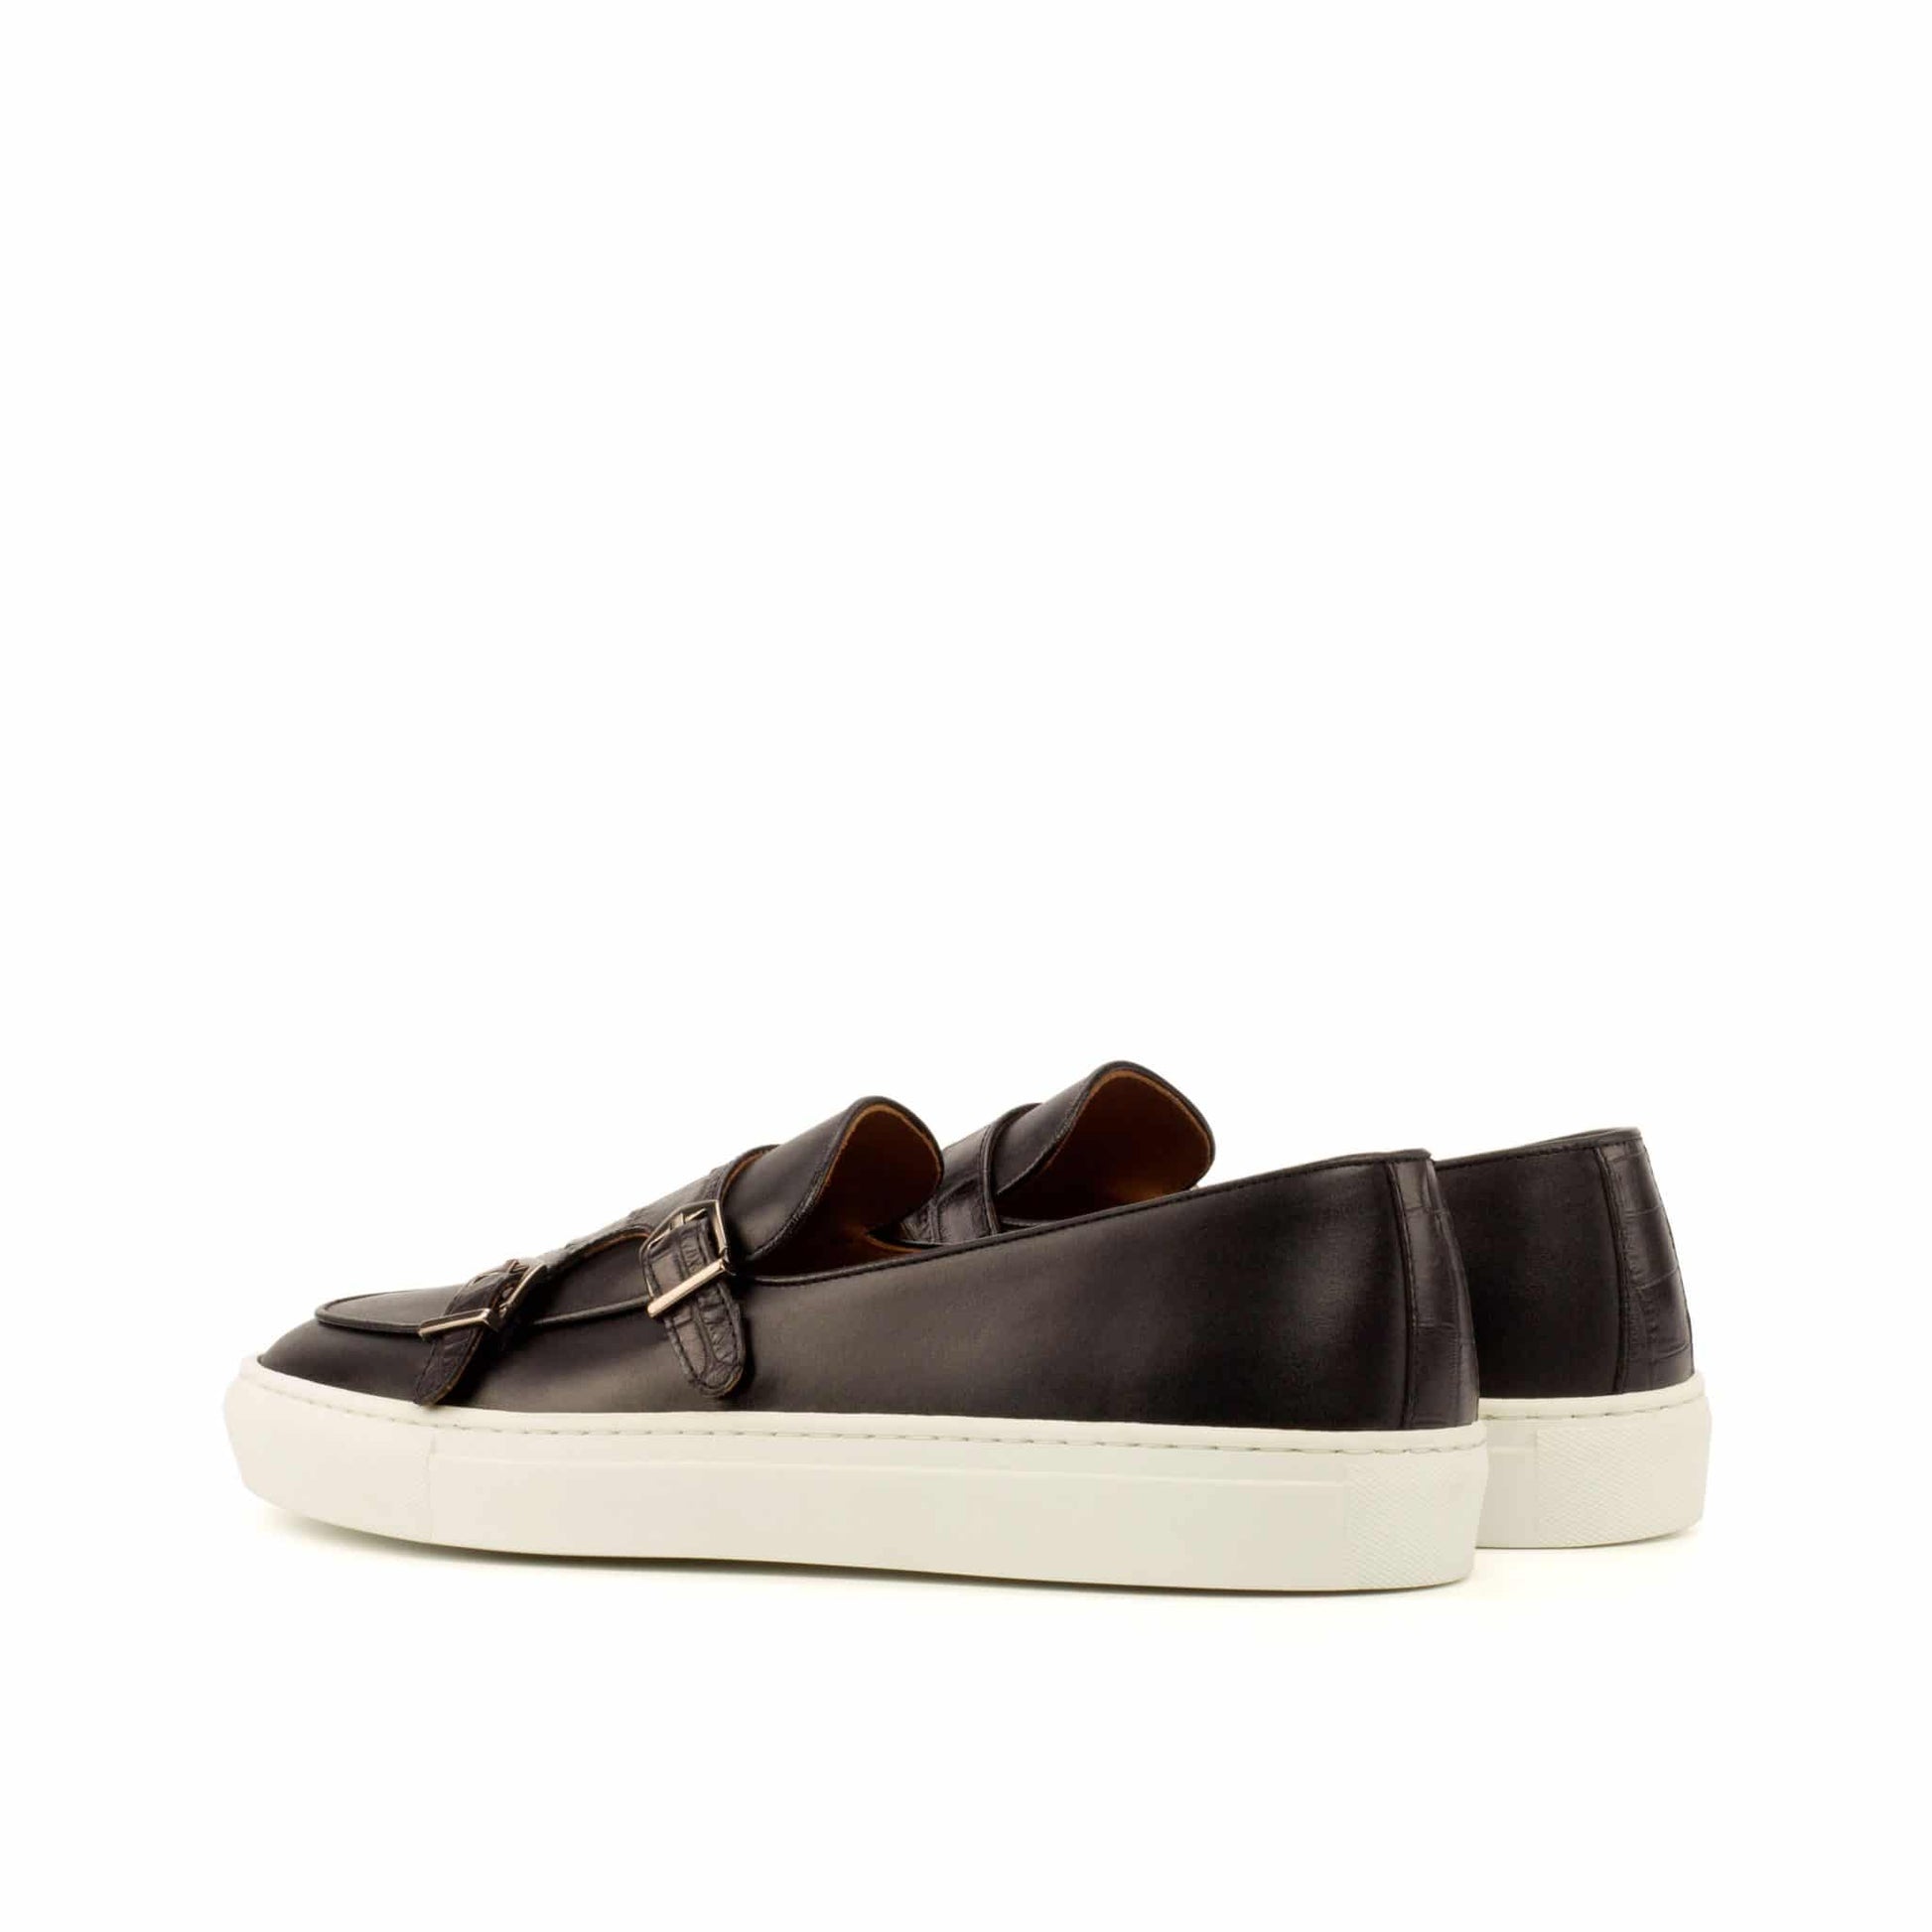 Black Croco Print Leather Slip On Monk Strap Sneaker for Men. White Comfortable Cup Sole.